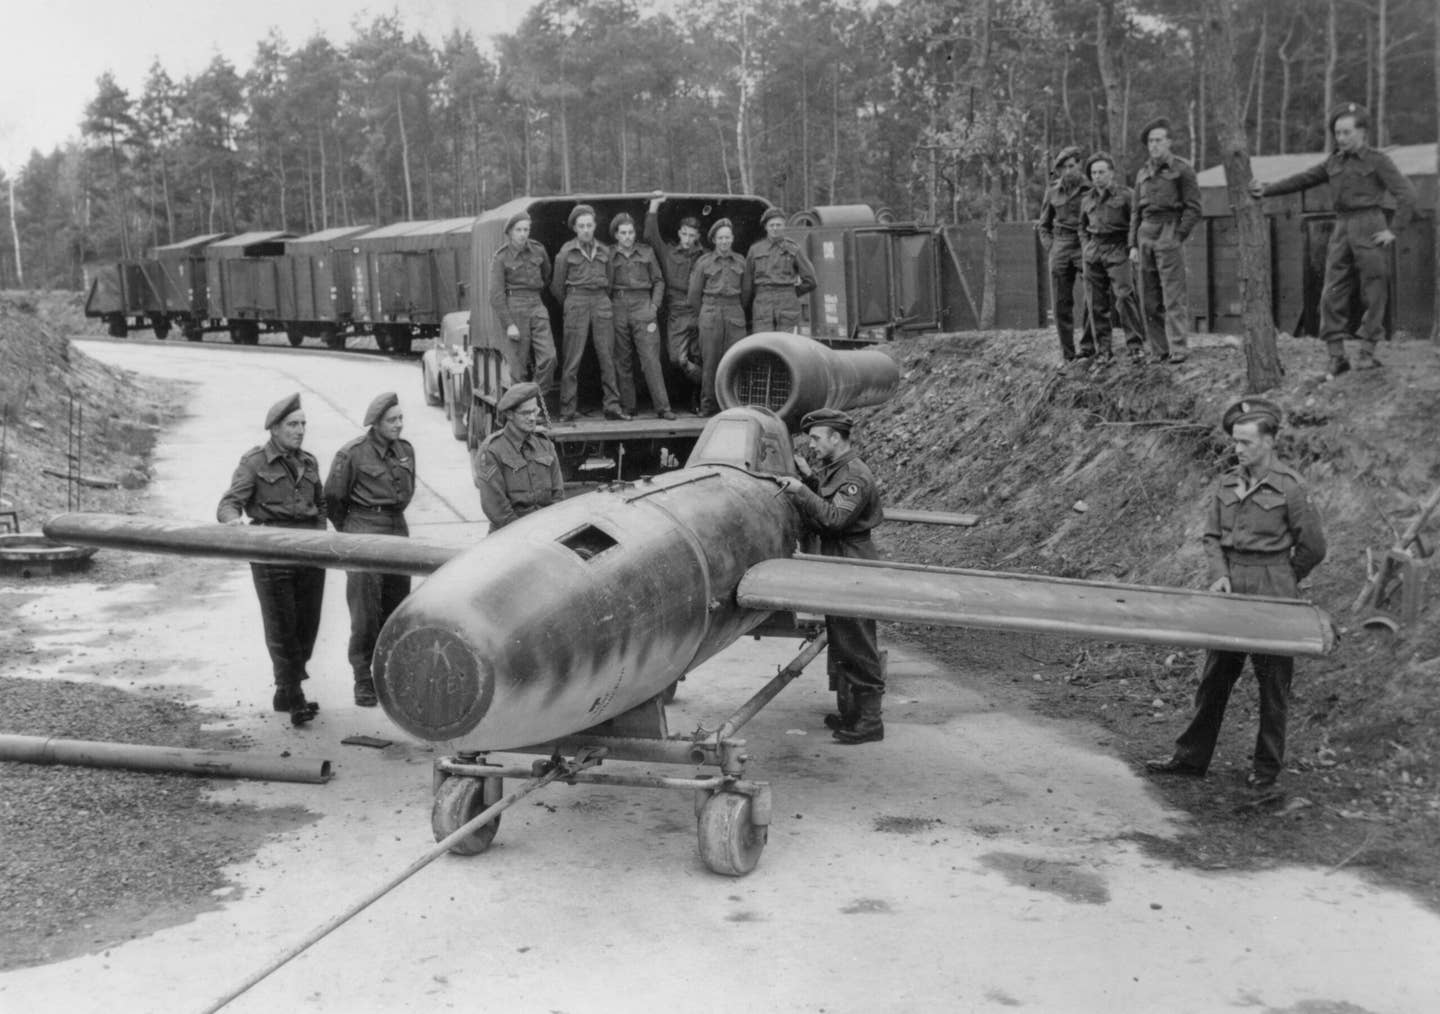 British Army soldiers examine a captured pulsejet-engined Fieseler Fi 103R Reichenberg — a piloted version of the V-1 flying bomb — in Lower Saxony, Germany, in November 1945. <em>Photo by Chris Ware/Keystone/Hulton Archive/Getty Images</em>